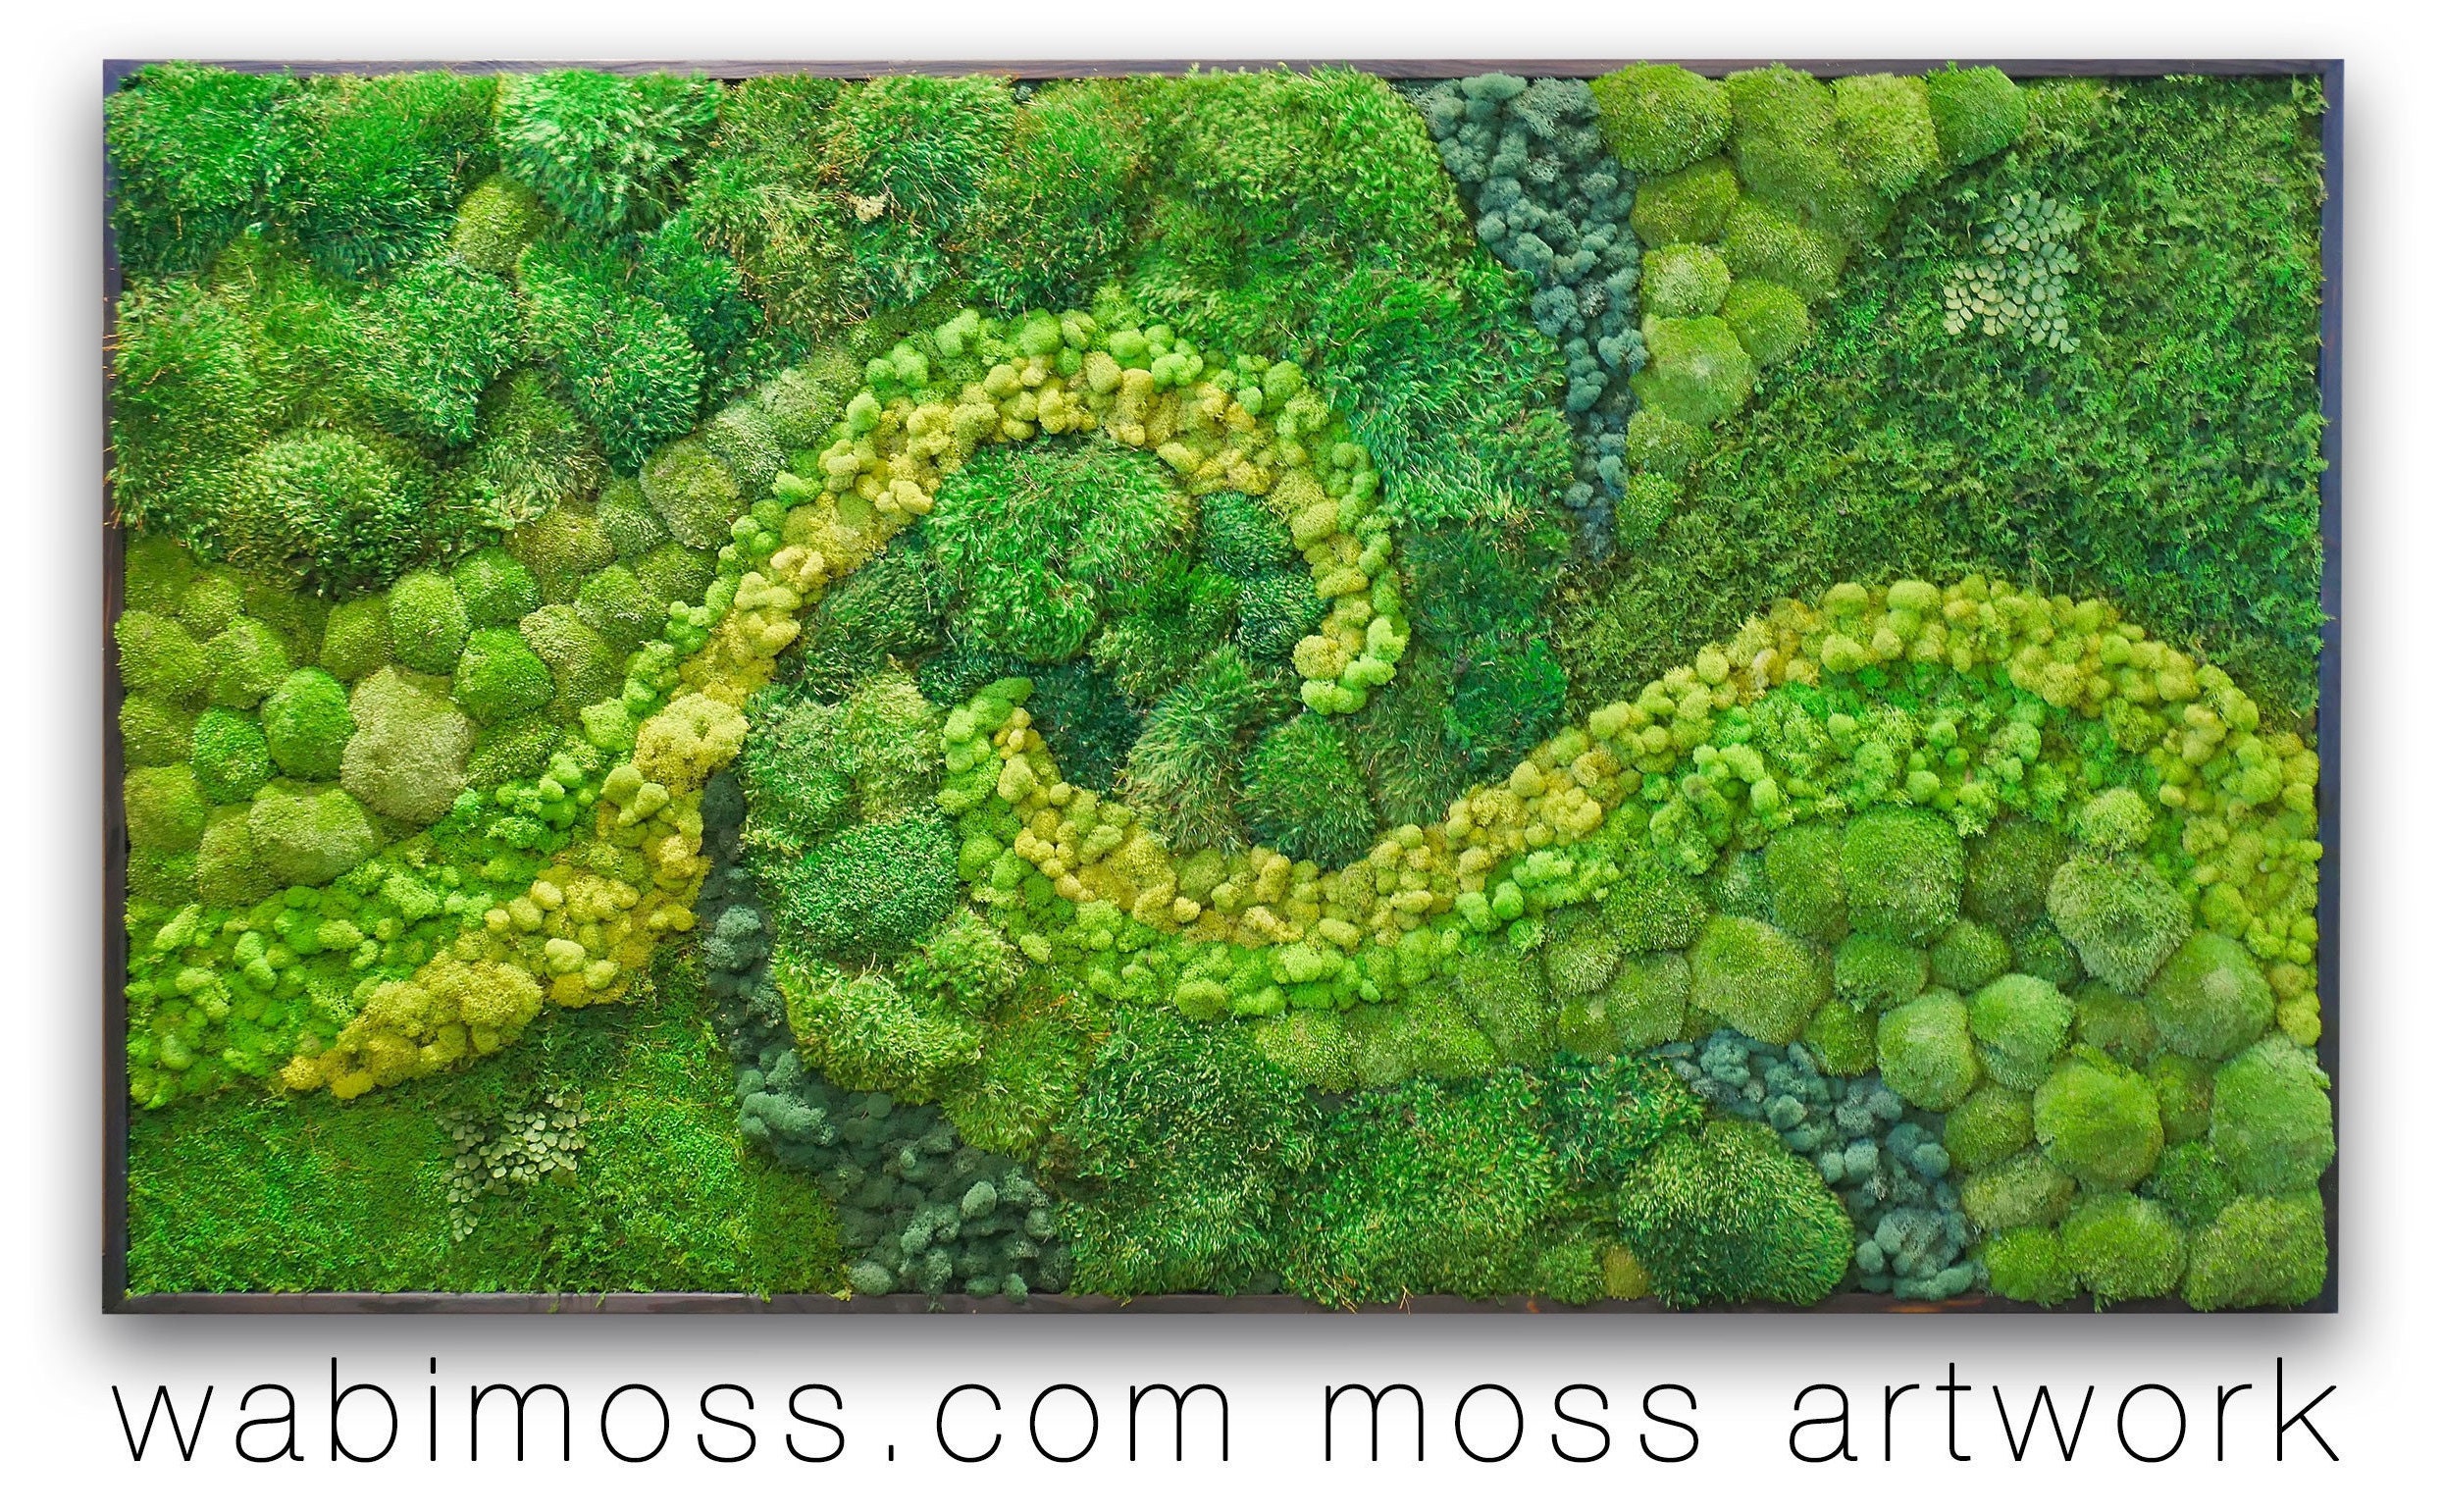 58x58 Real Preserved Moss Wall Art Green Wall Collage No Sticks. No Care Green Wall Art. Real Preserved Moss and Ferns